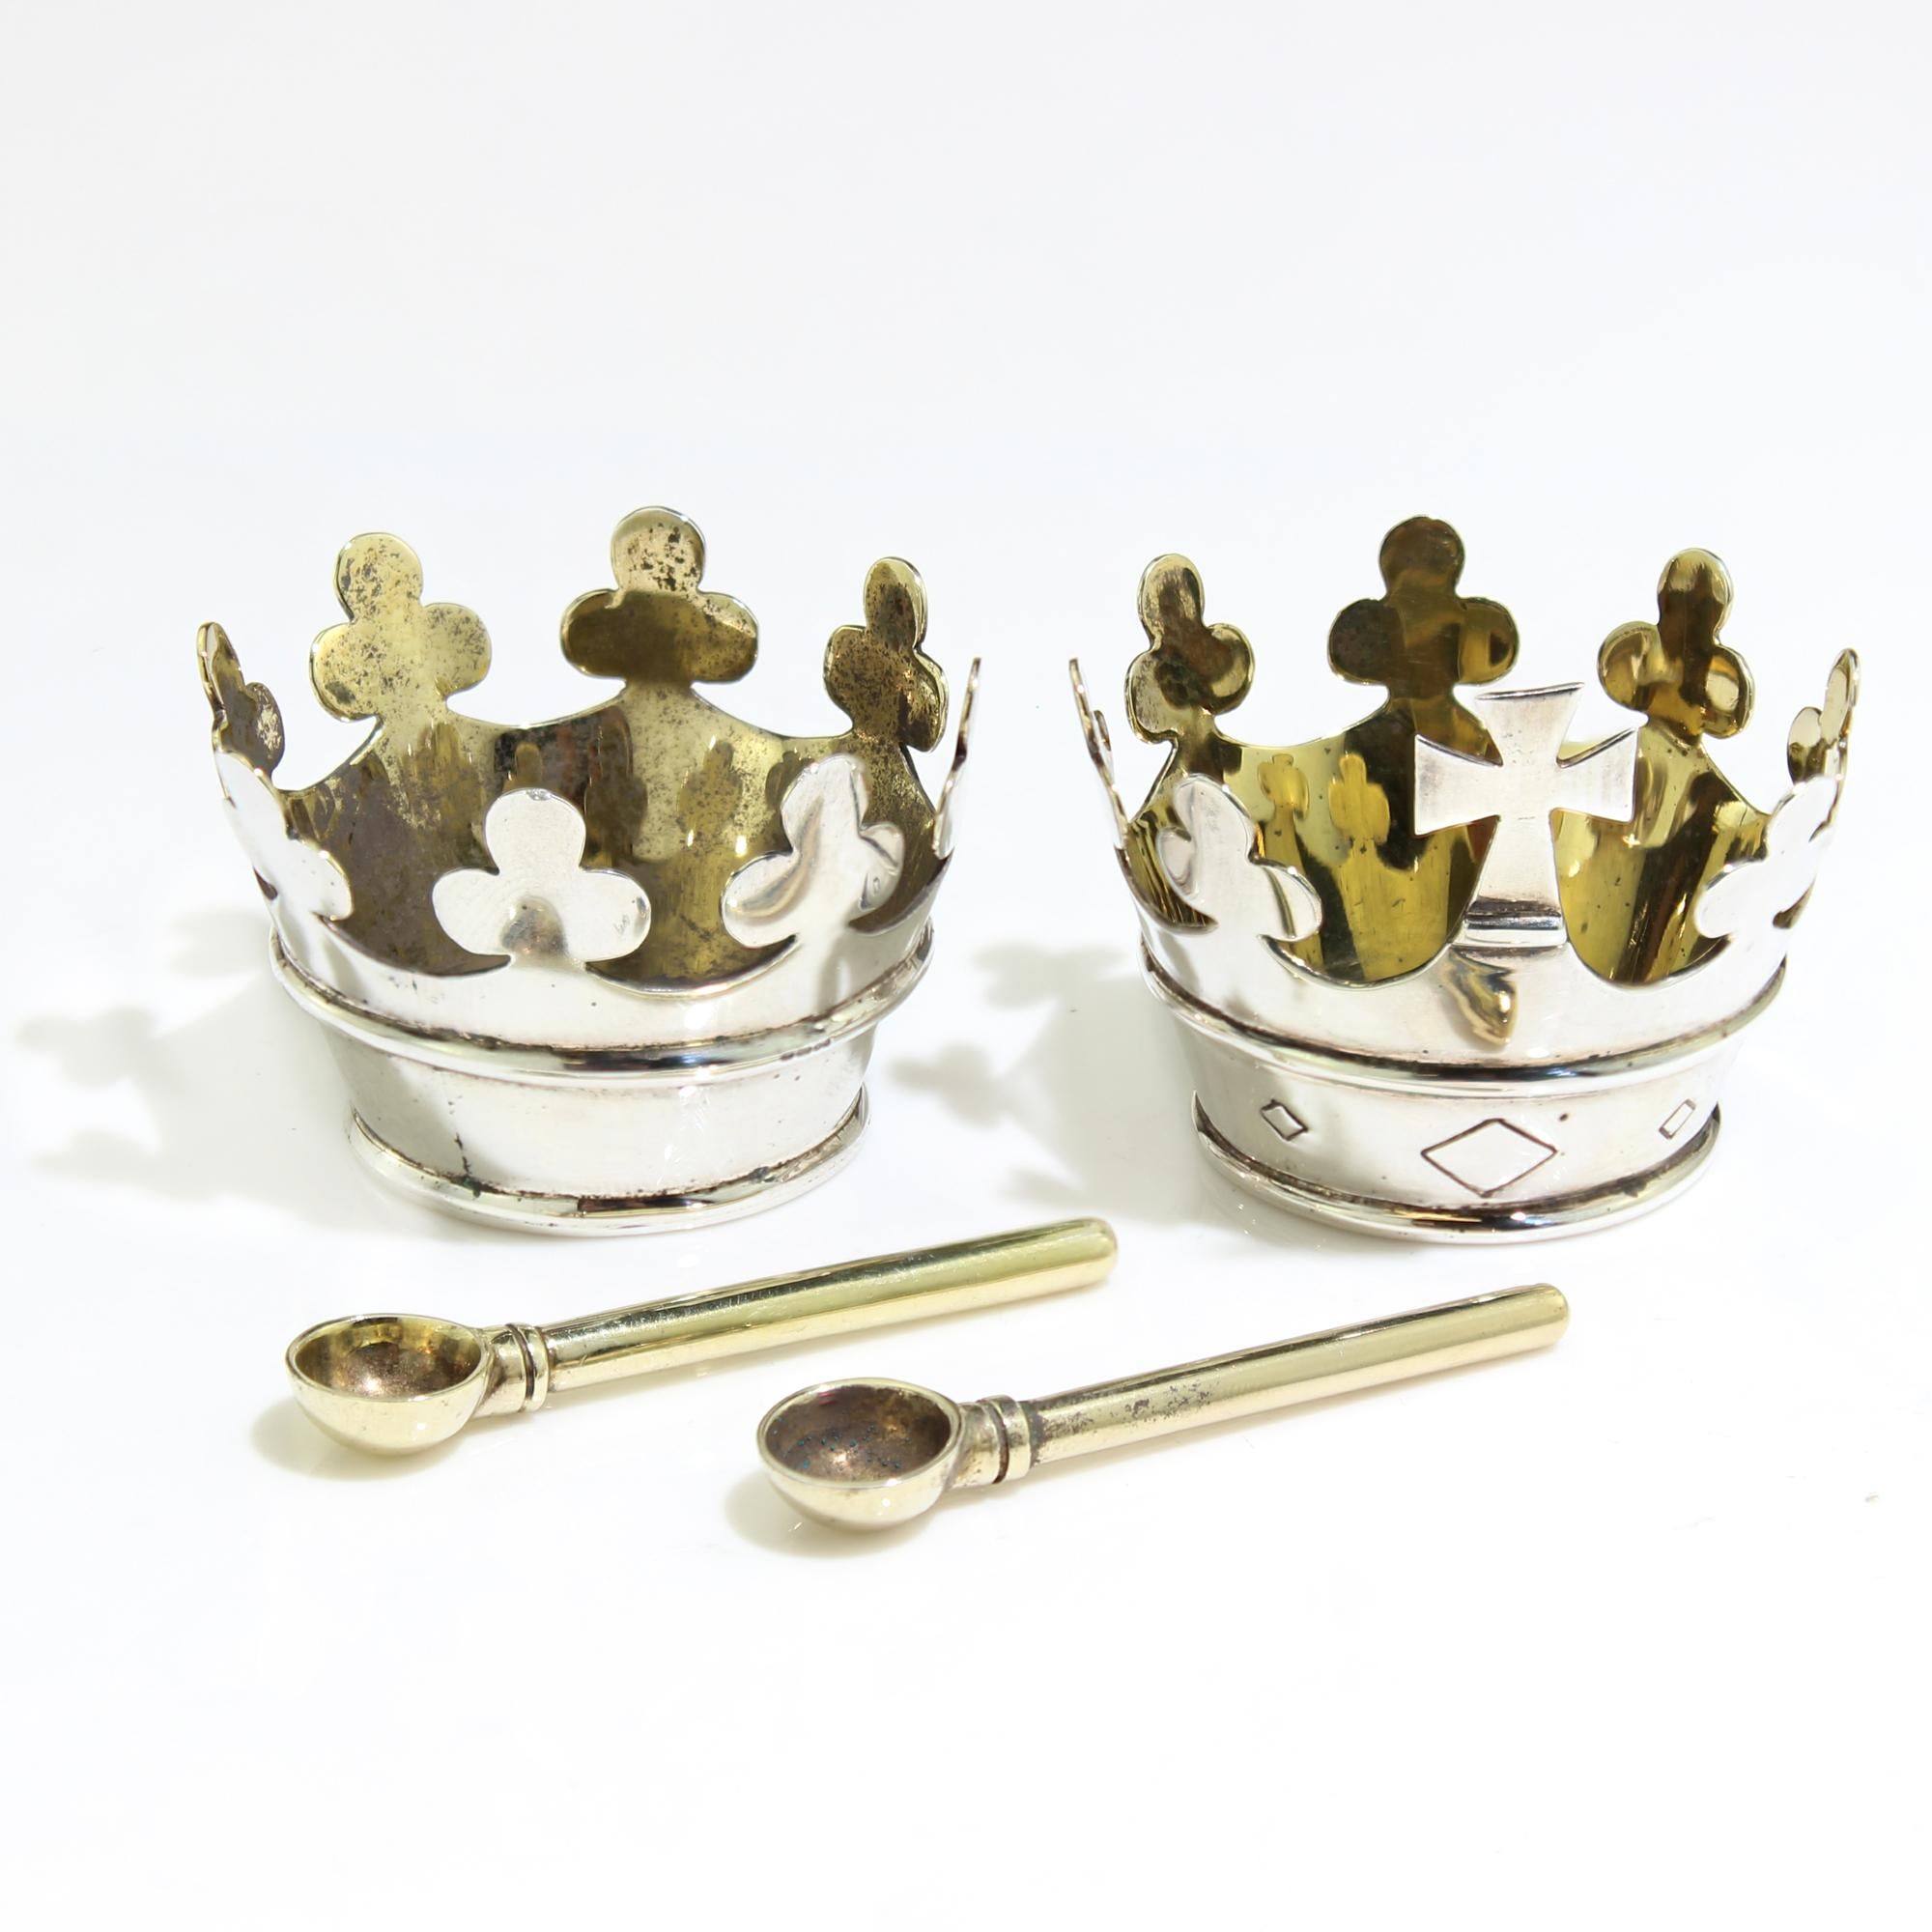 Links of London pair of sterling silver salt cellars,
Made in England, Circa 1970'a
Designer: Links of London
Fully hallmarked.

Dimensions - 
Diameter x Height: 4 x 3.7 cm
Spoon size: 4.4 x 1 cm
Gross Weight: 53 grams

Condition: General